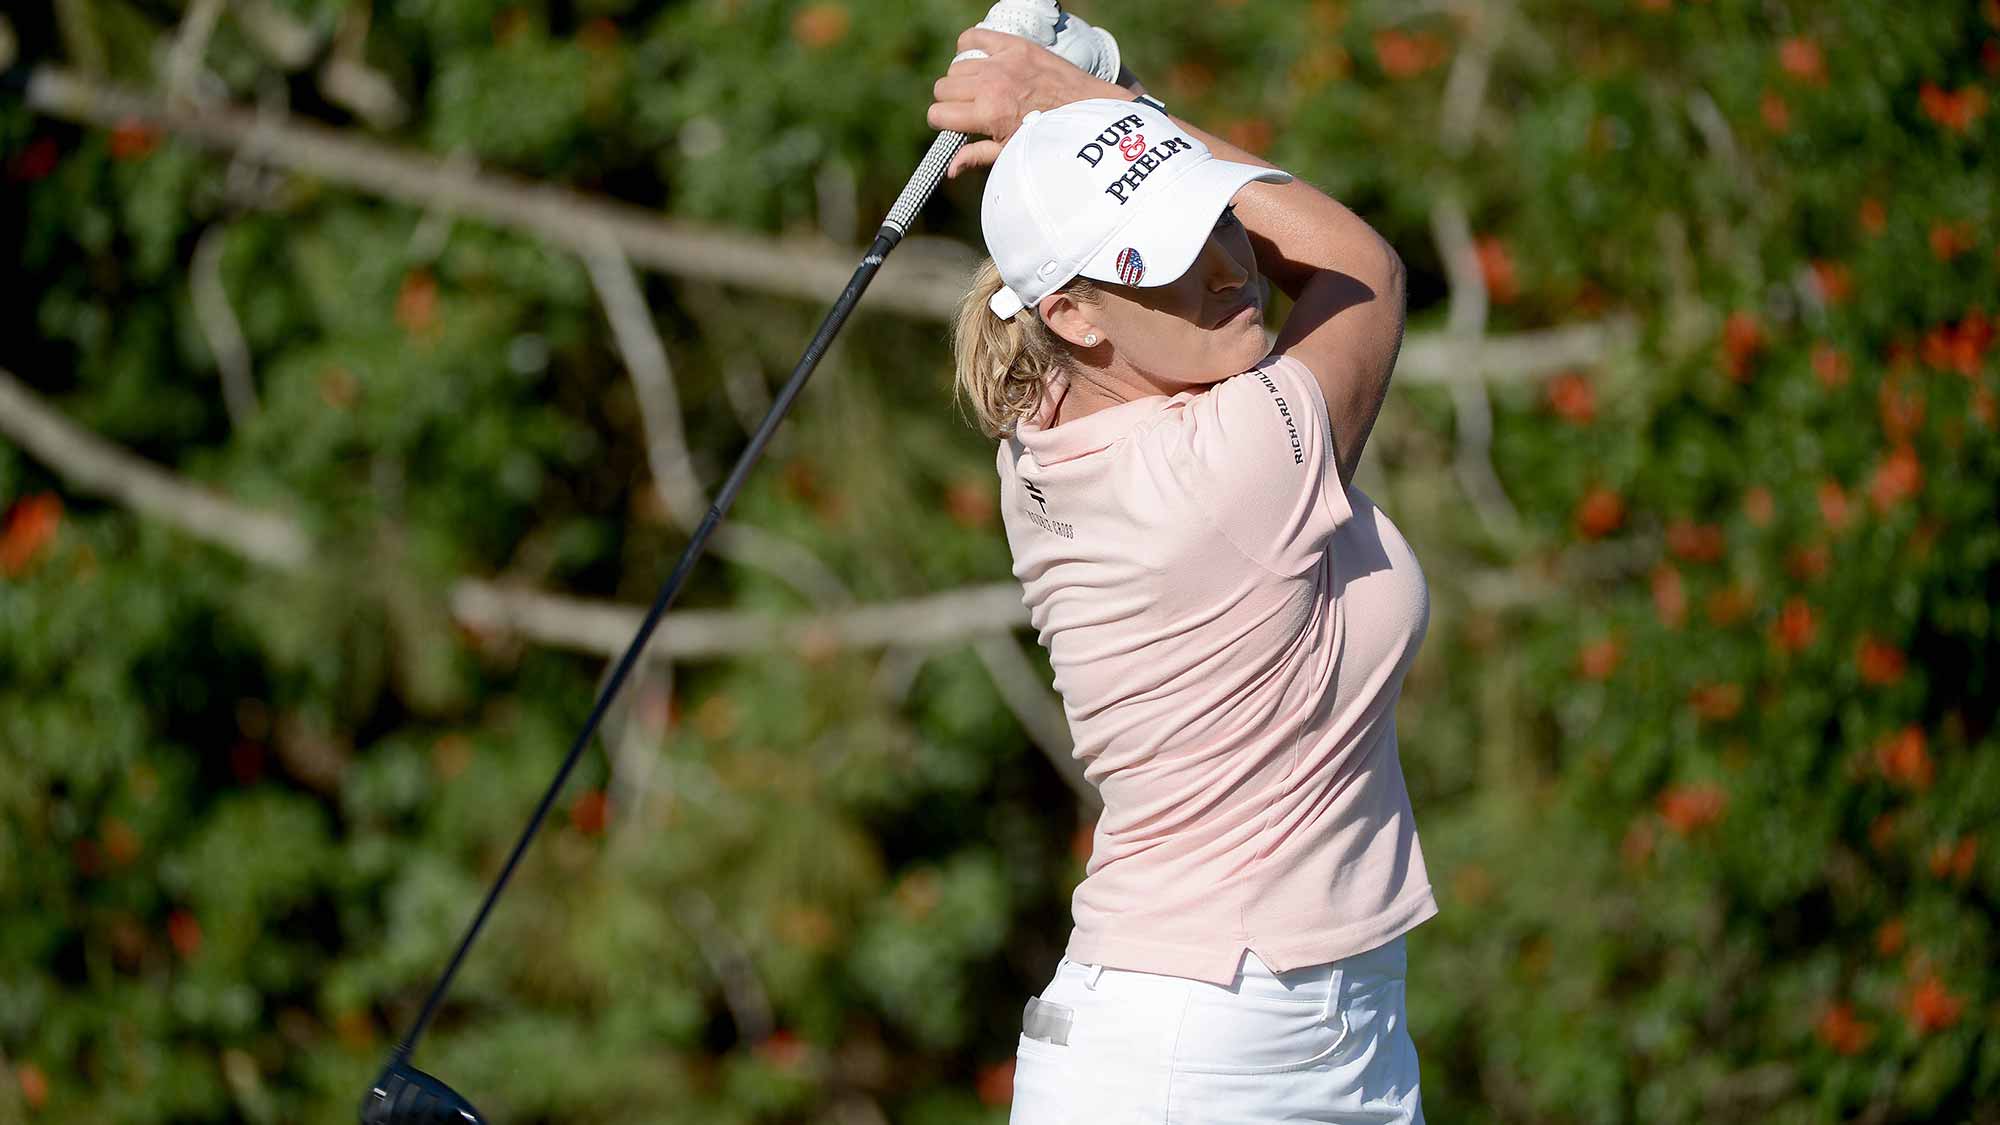 Cristie Kerr tees off the 15th hole during Round One of the LPGA KIA Classic at the Aviara Golf Club on March 26, 2015 in Carlsbad, California